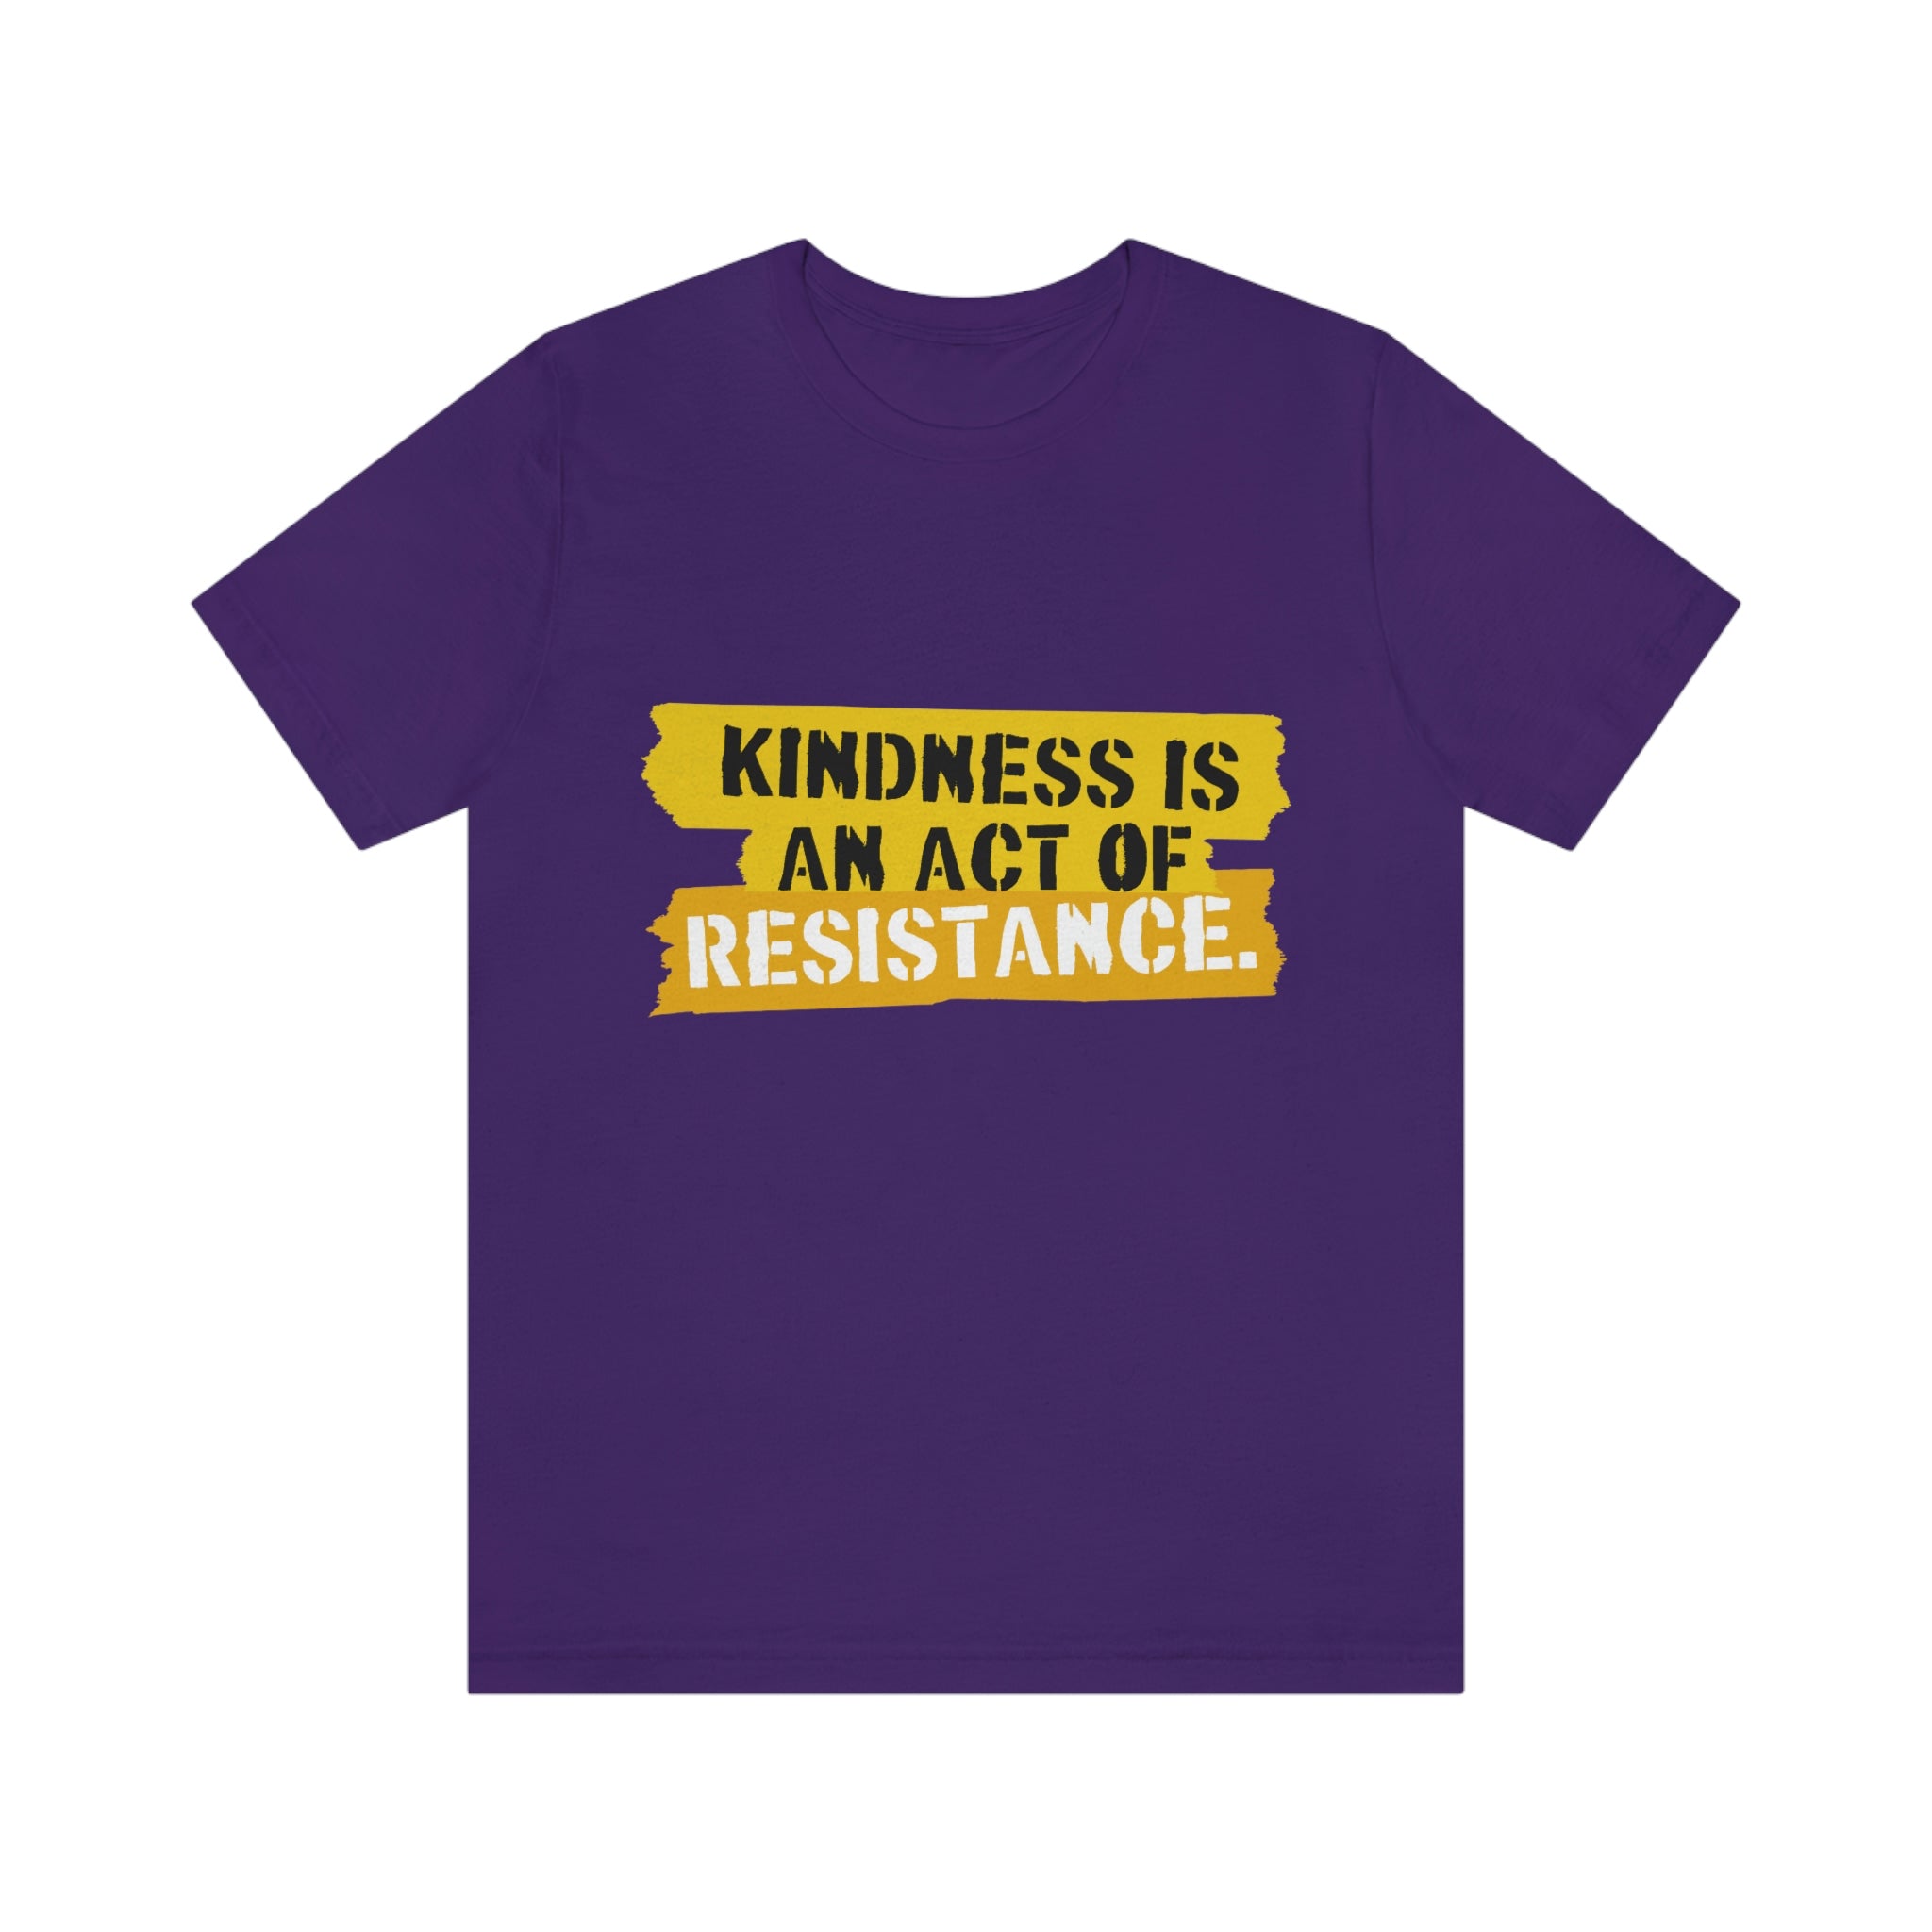 Kindness Is an Act of Resistance - Stencil Style : Unisex 100% Premium Cotton T-Shirt